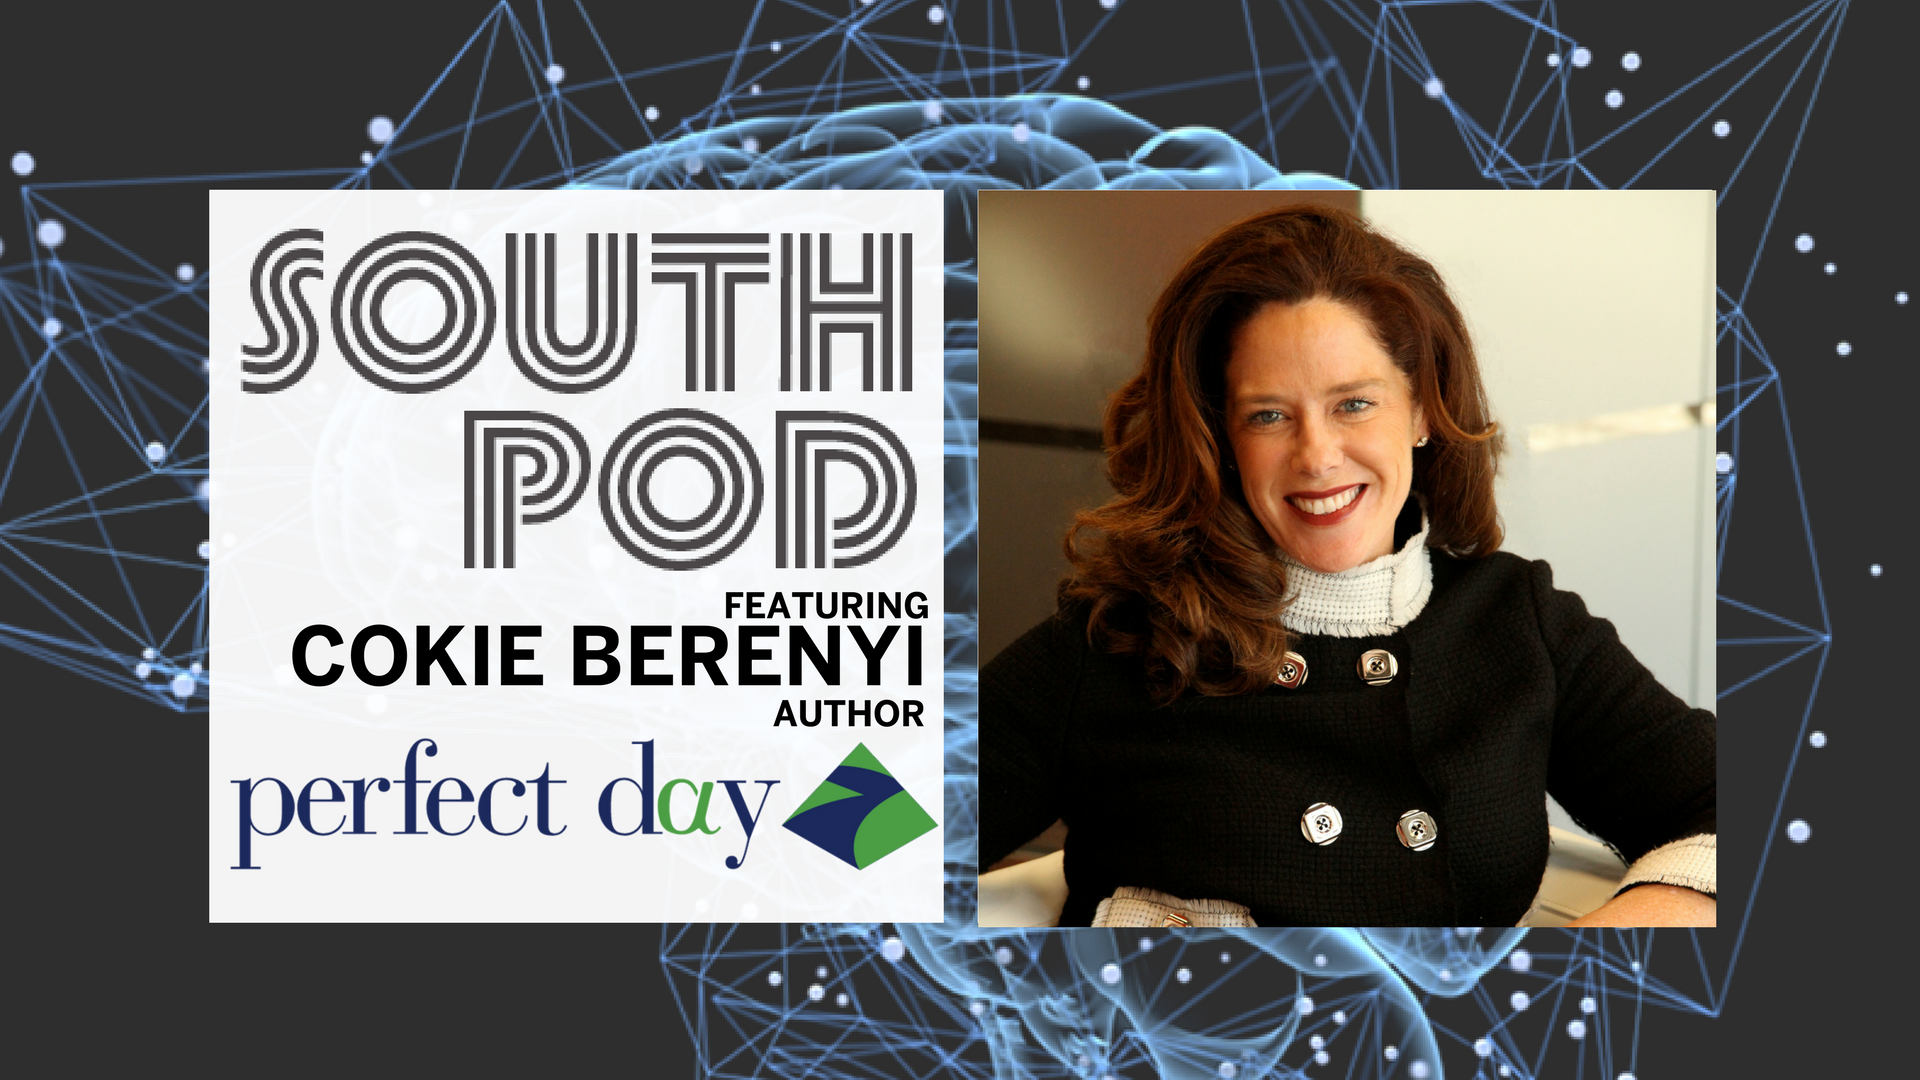 How to Have a Perfect Day With Author Cokie Berenyi